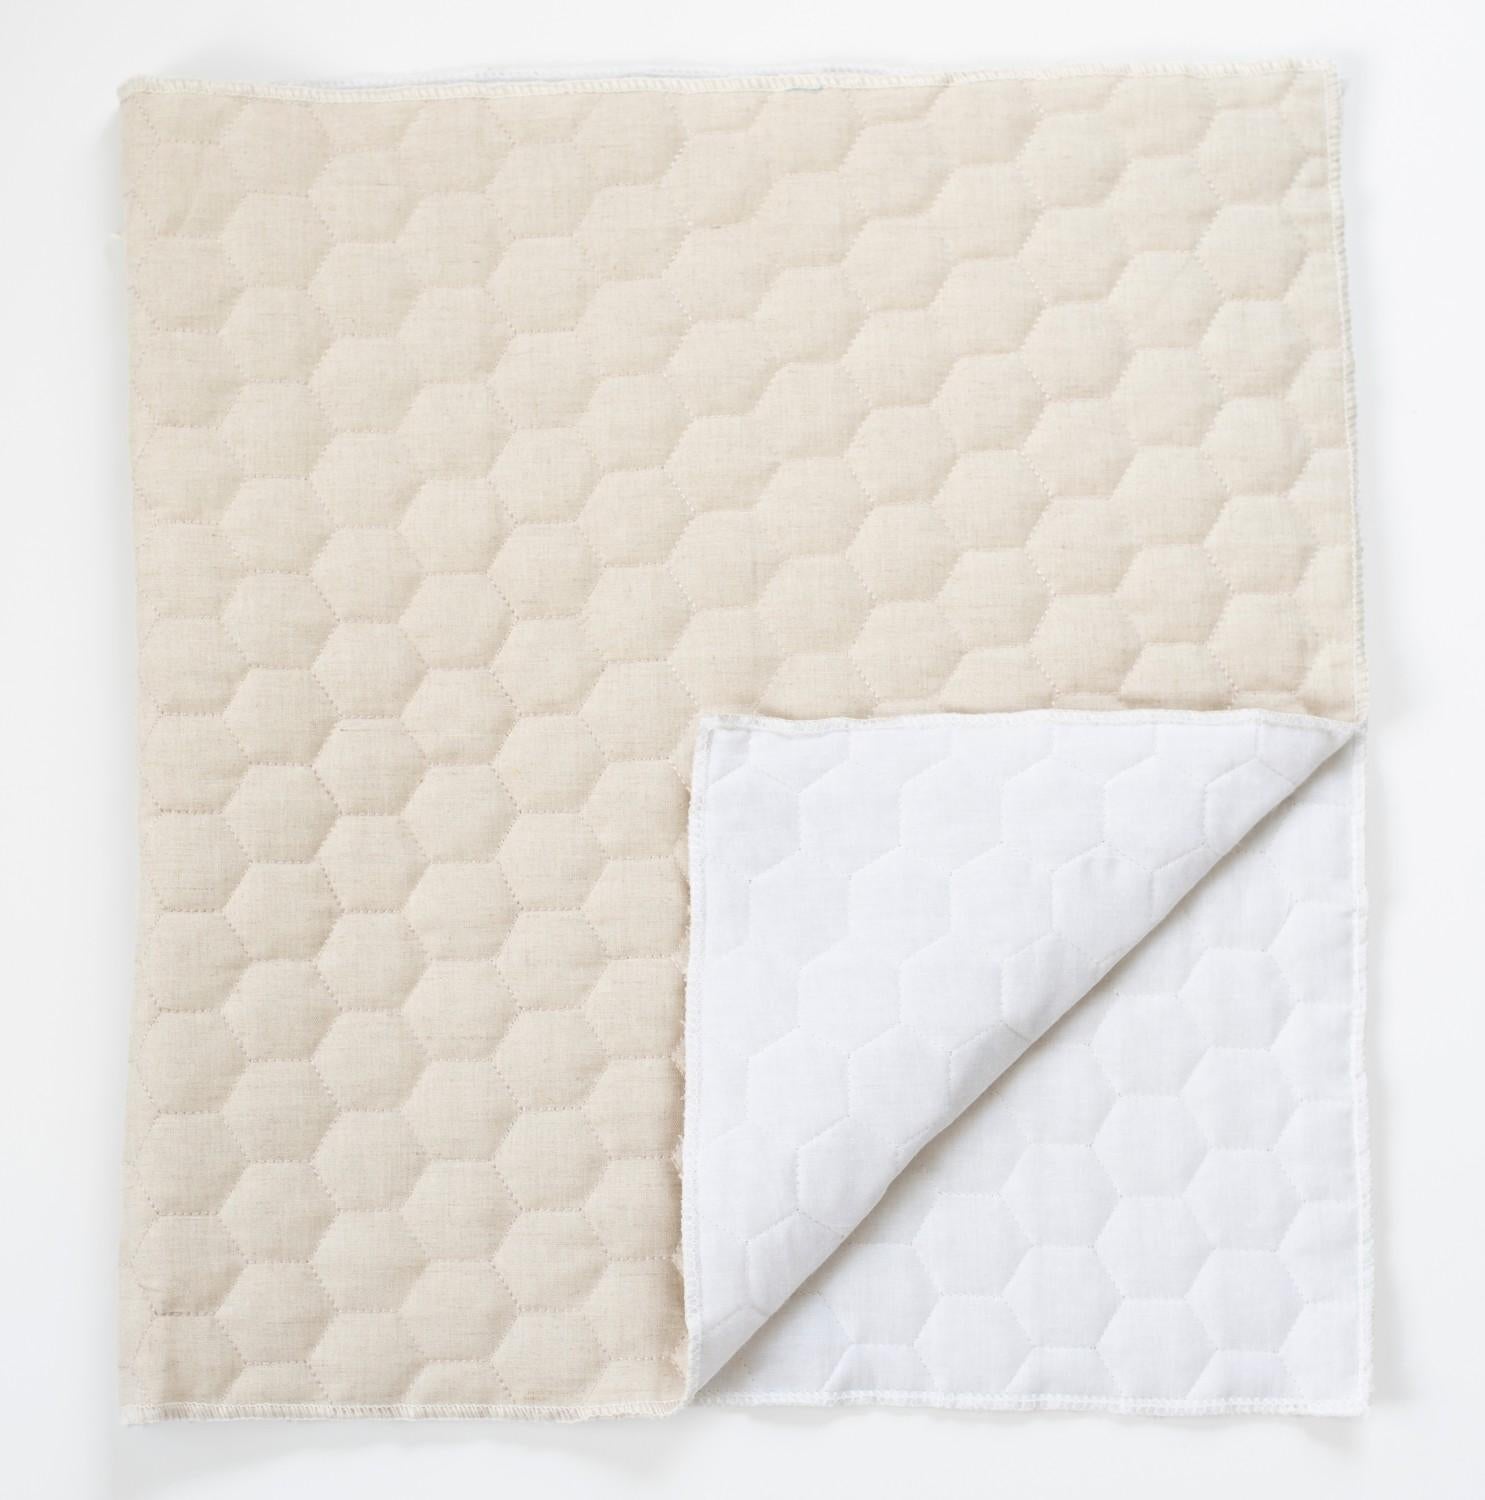 Quilted Pillow Cover Blank 19in x 19in Oat Linen Hexagon Quilt # KDKB260